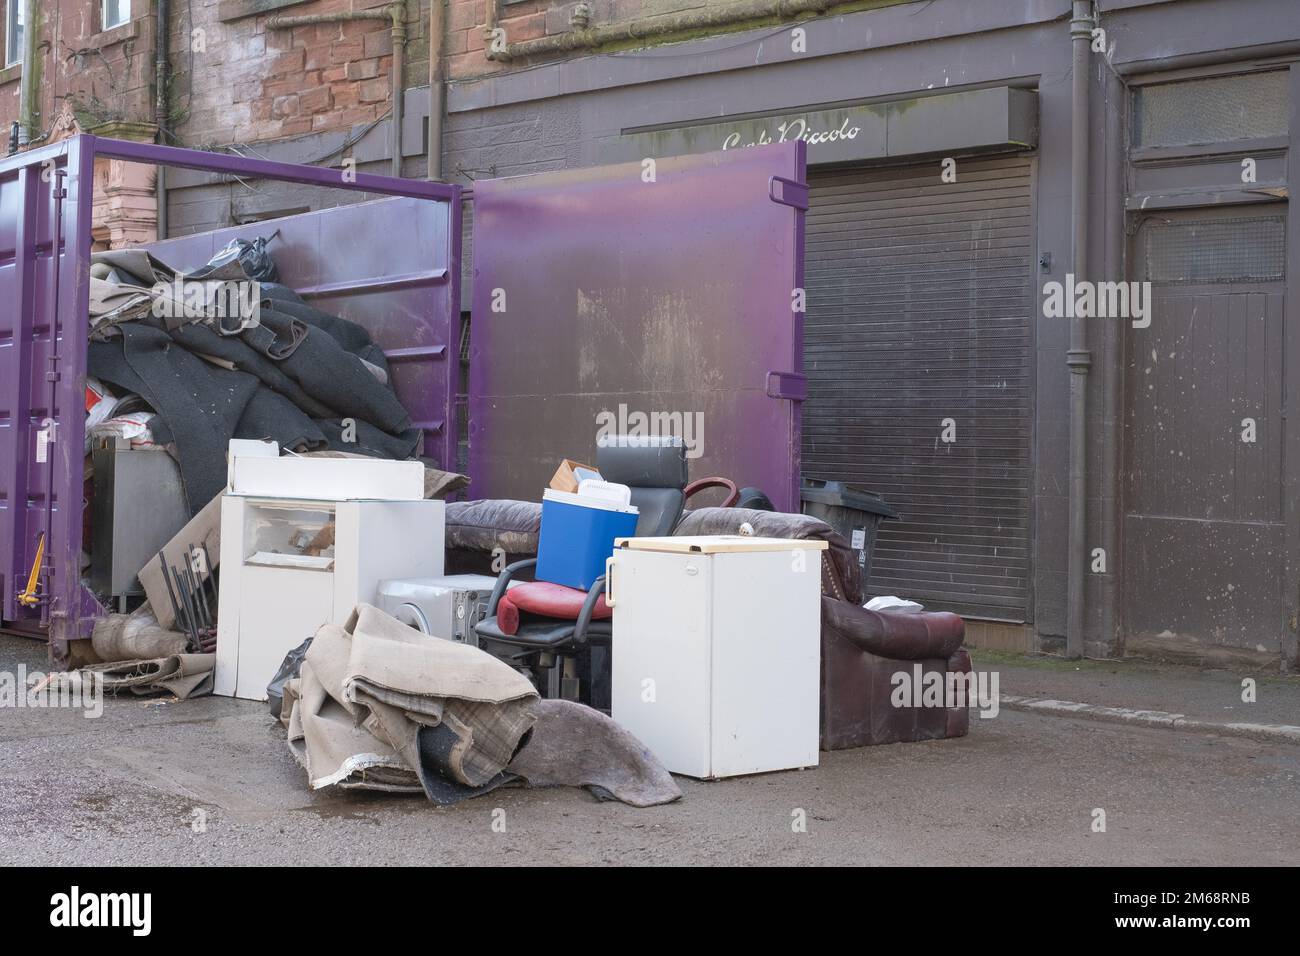 The clear up continues in Dumfries, Scotland after huge floods caused chaos on the 30th December 2022. Stock Photo